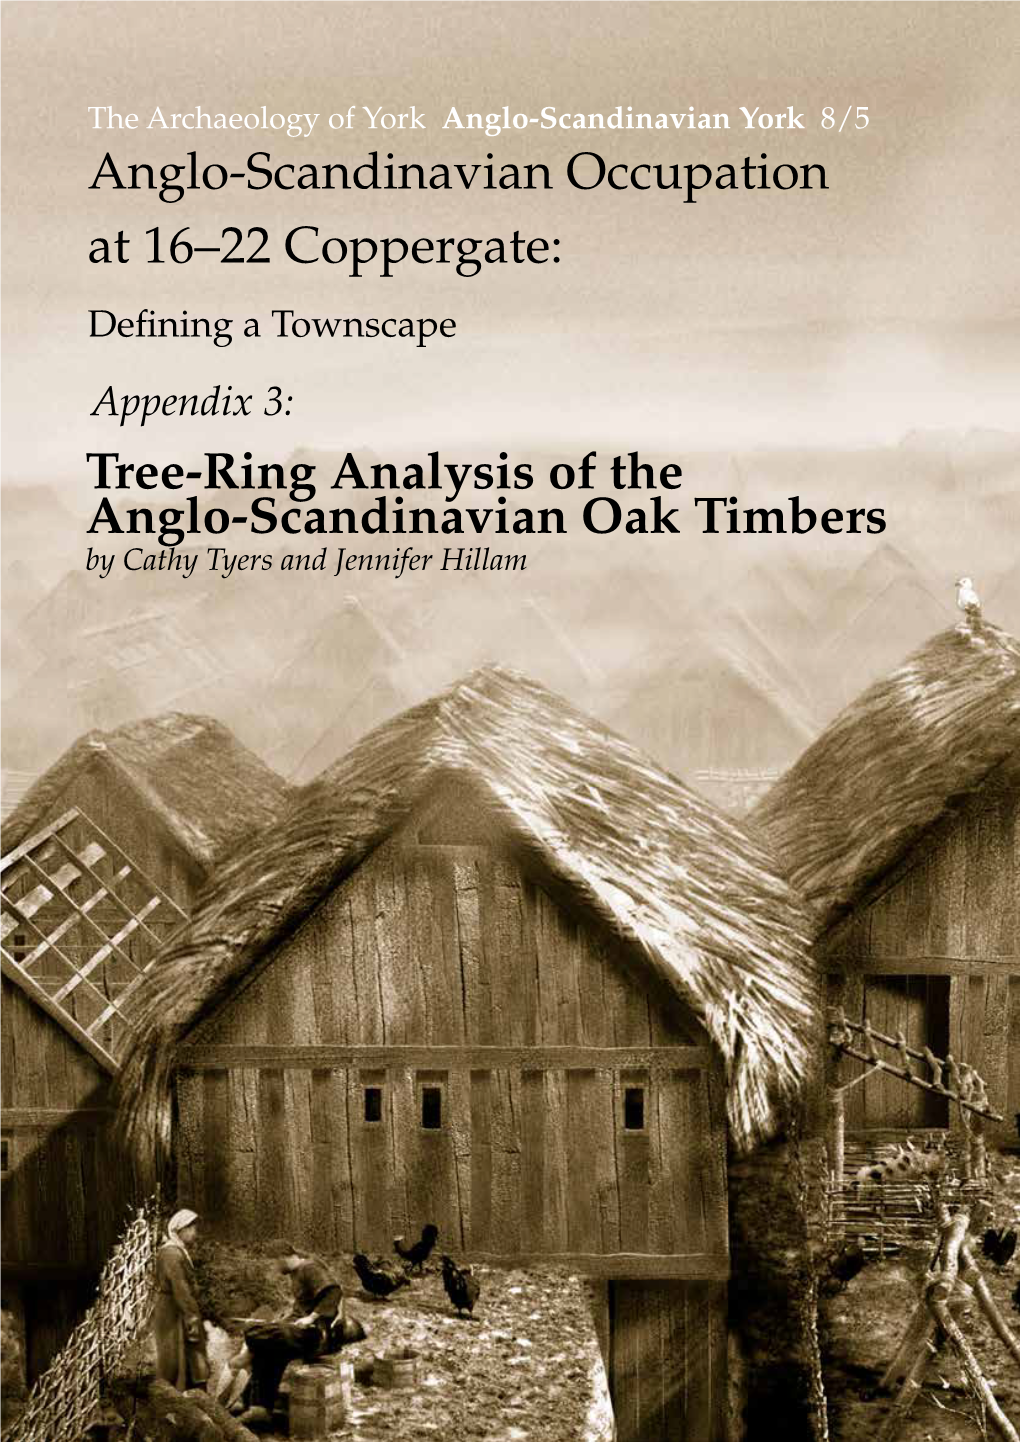 Tree-Ring Analysis of the Anglo-Scandinavian Oak Timbers by Cathy Tyers and Jennifer Hillam